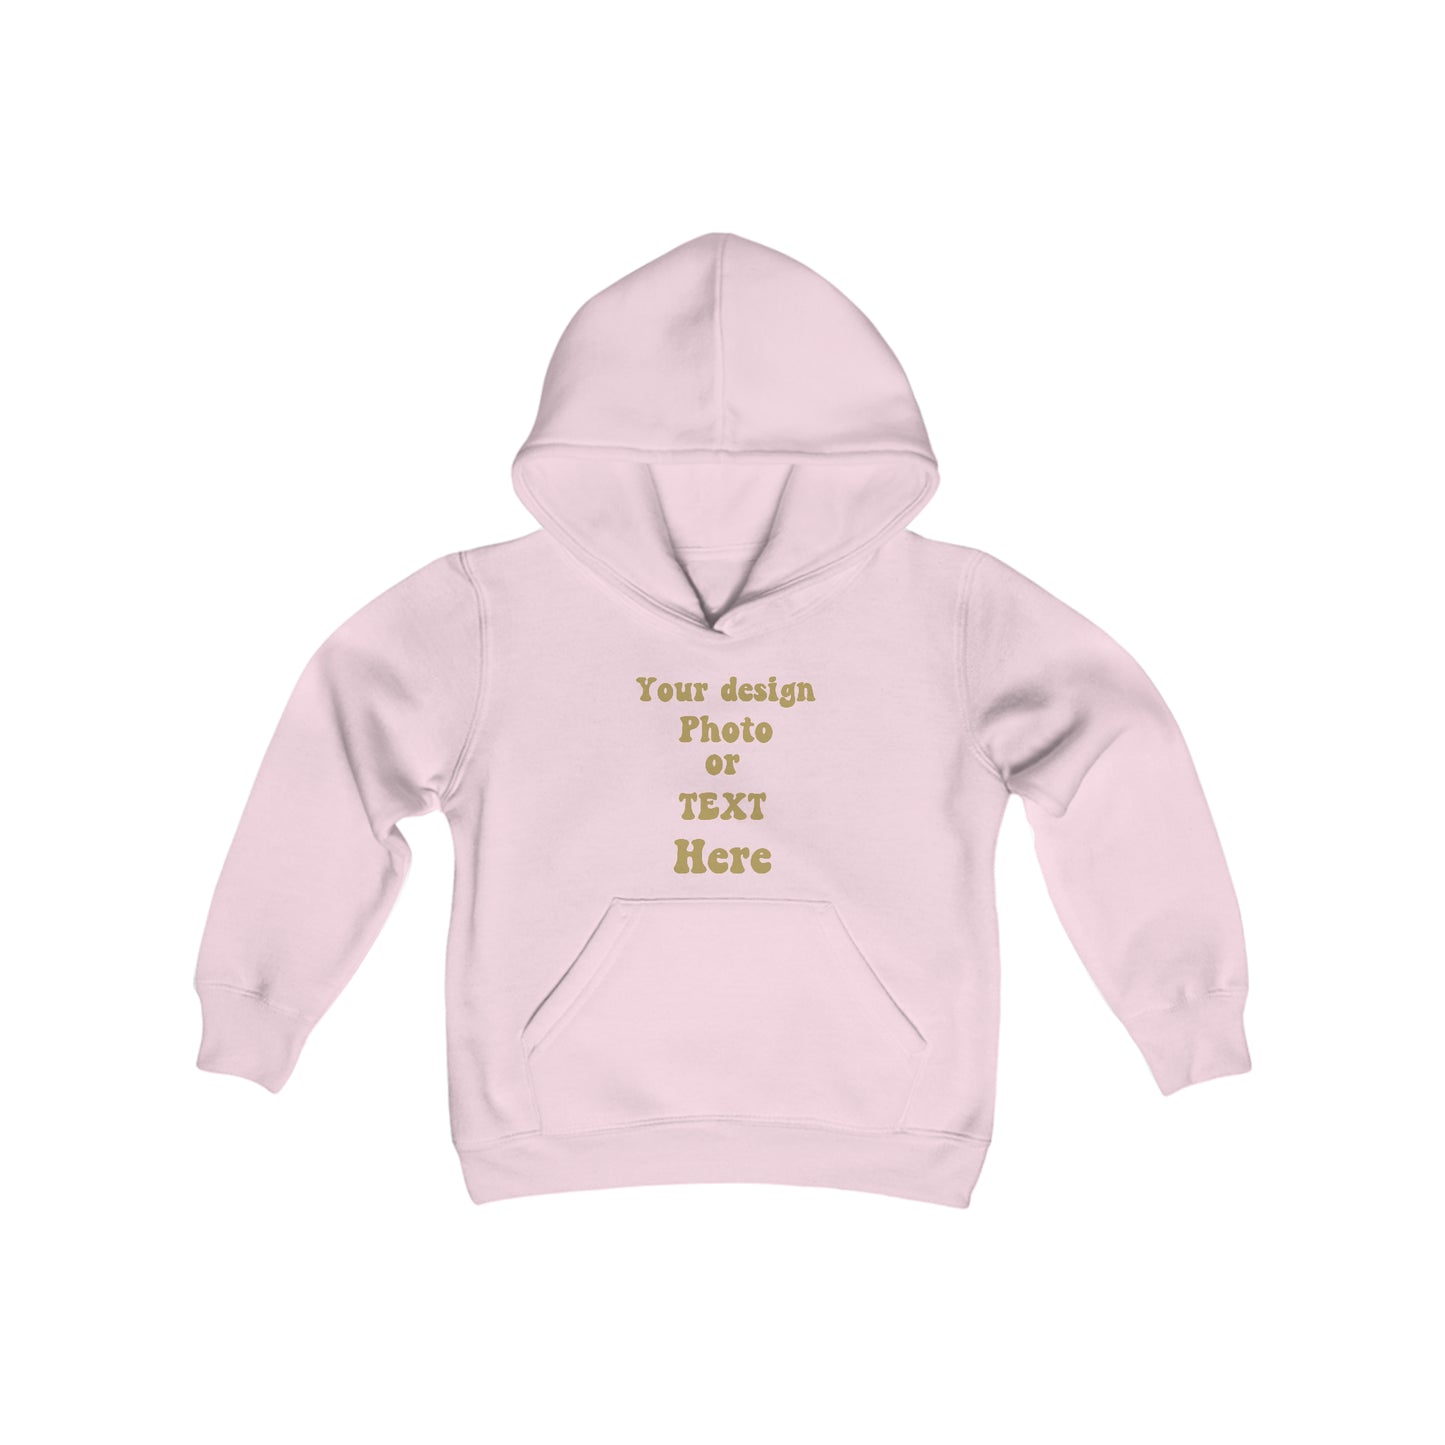 Youth Heavy Blend Hooded Sweatshirt - Personalize It with Text and Photo Kids clothes Light Pink S 